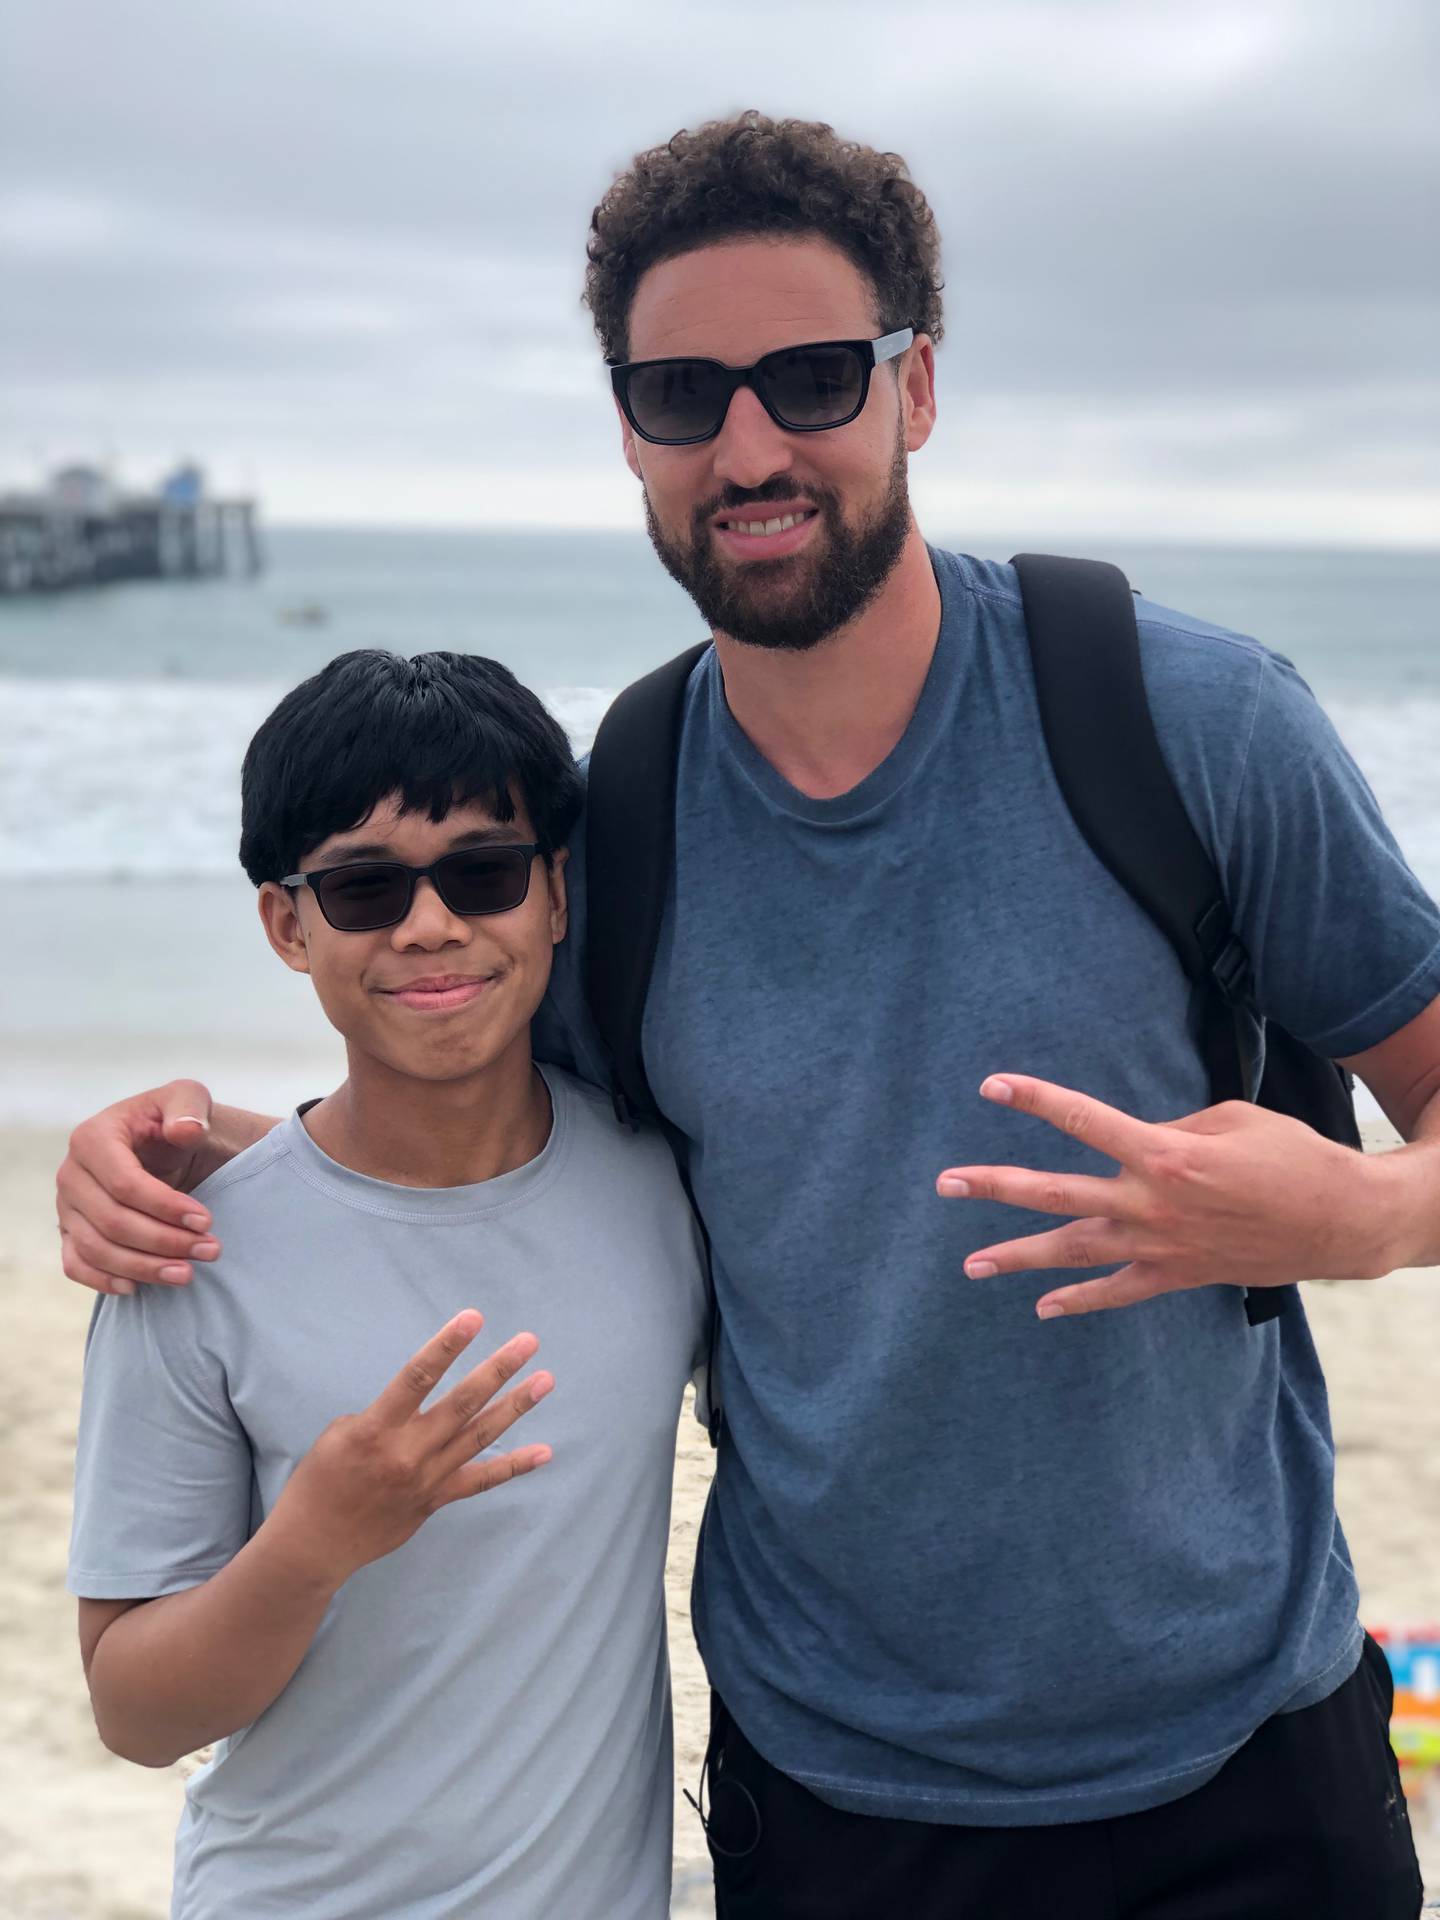 Golden State Warriors all-star Klay Thompson poses for a photo with Joseph Tagaban